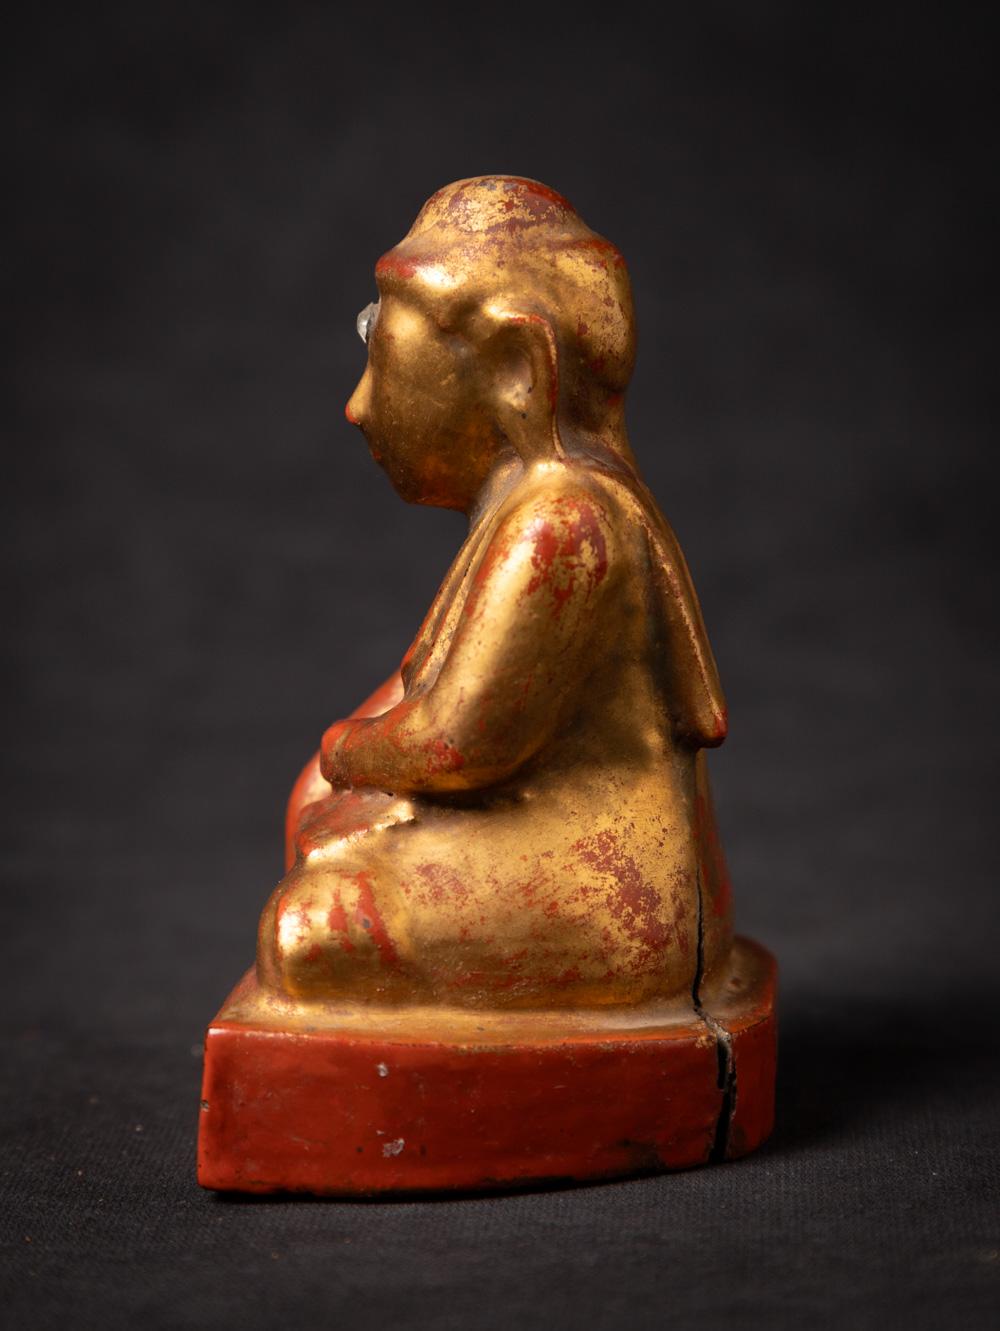 Material : wood
10,6 cm high
7,8 cm wide and 6 cm deep
Gilded with 24 krt. gold
Mandalay style
Bhumisparsha mudra
19th century
Weight: 117 grams
Originating from Burma
Nr: 2530-11